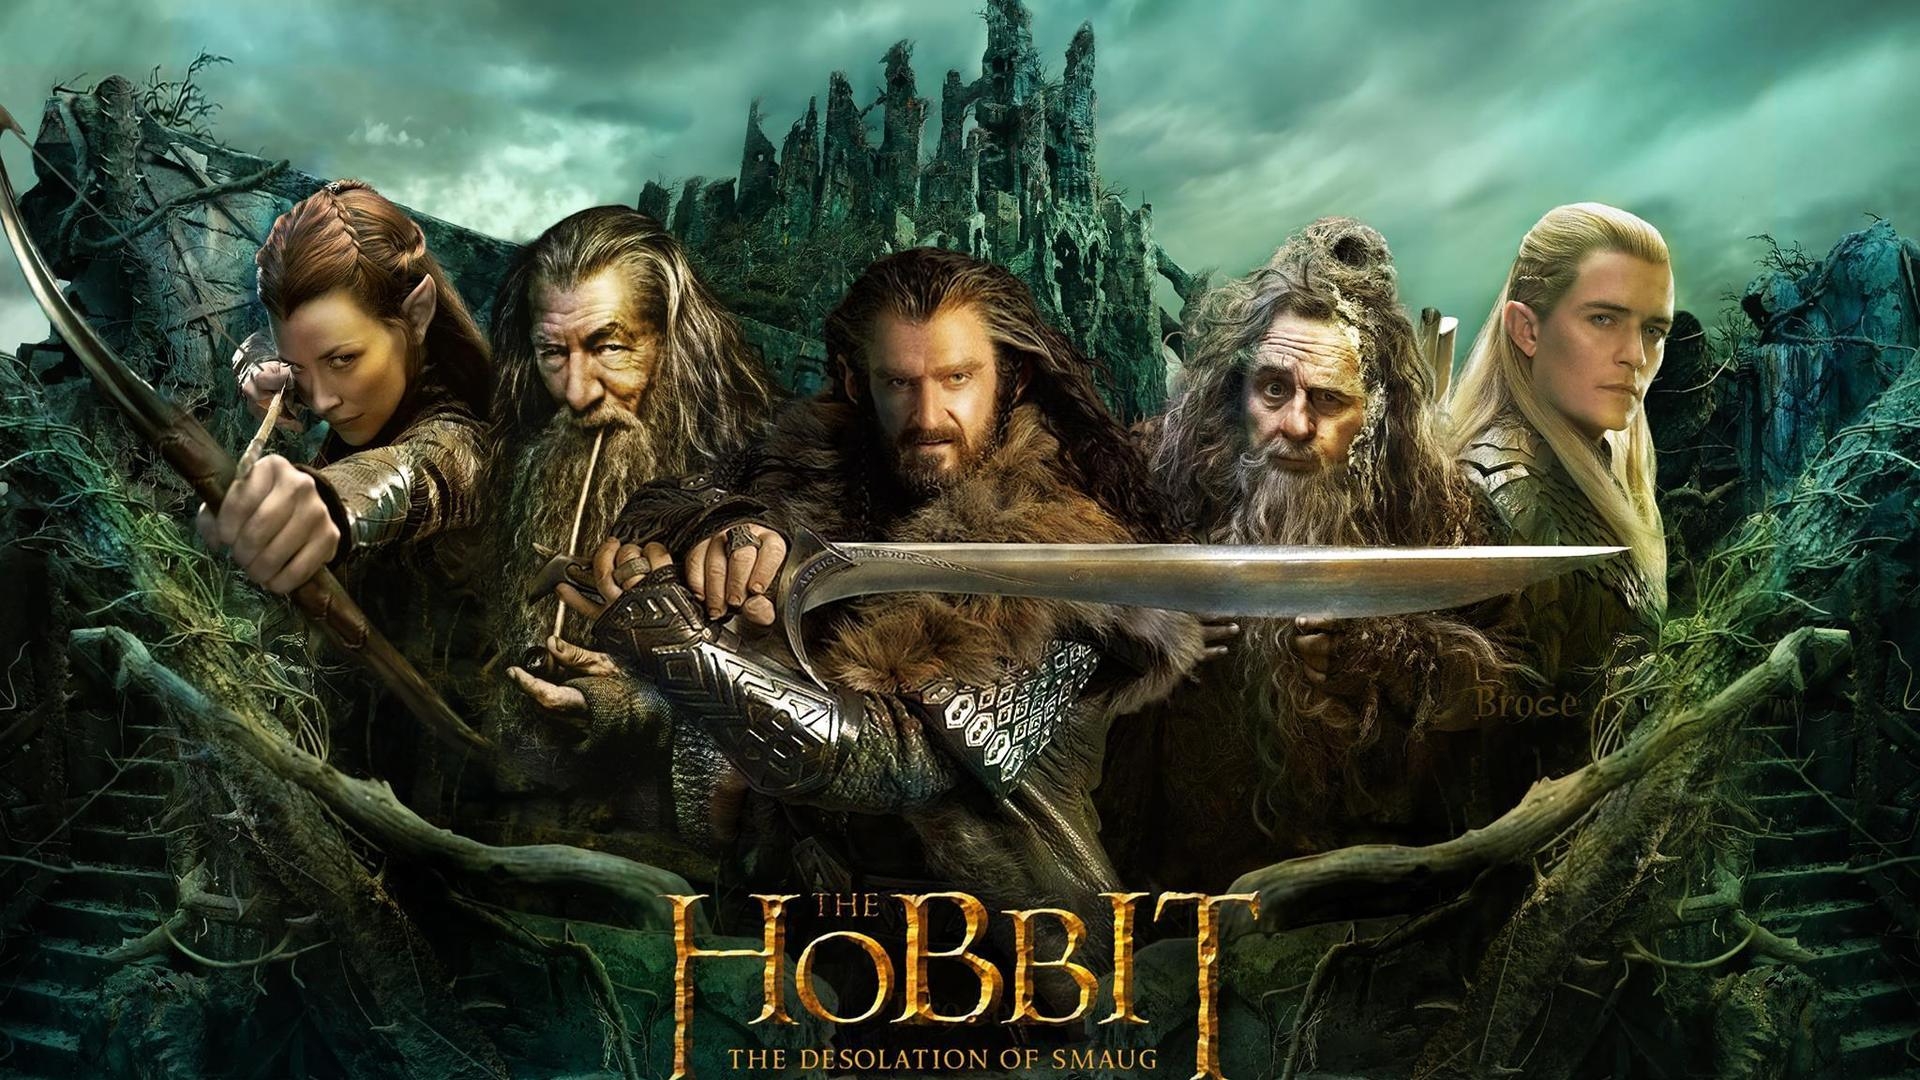  The Hobbit The Desolation of Smaug Poster for 1920 x 1080 HDTV 1080p resolution